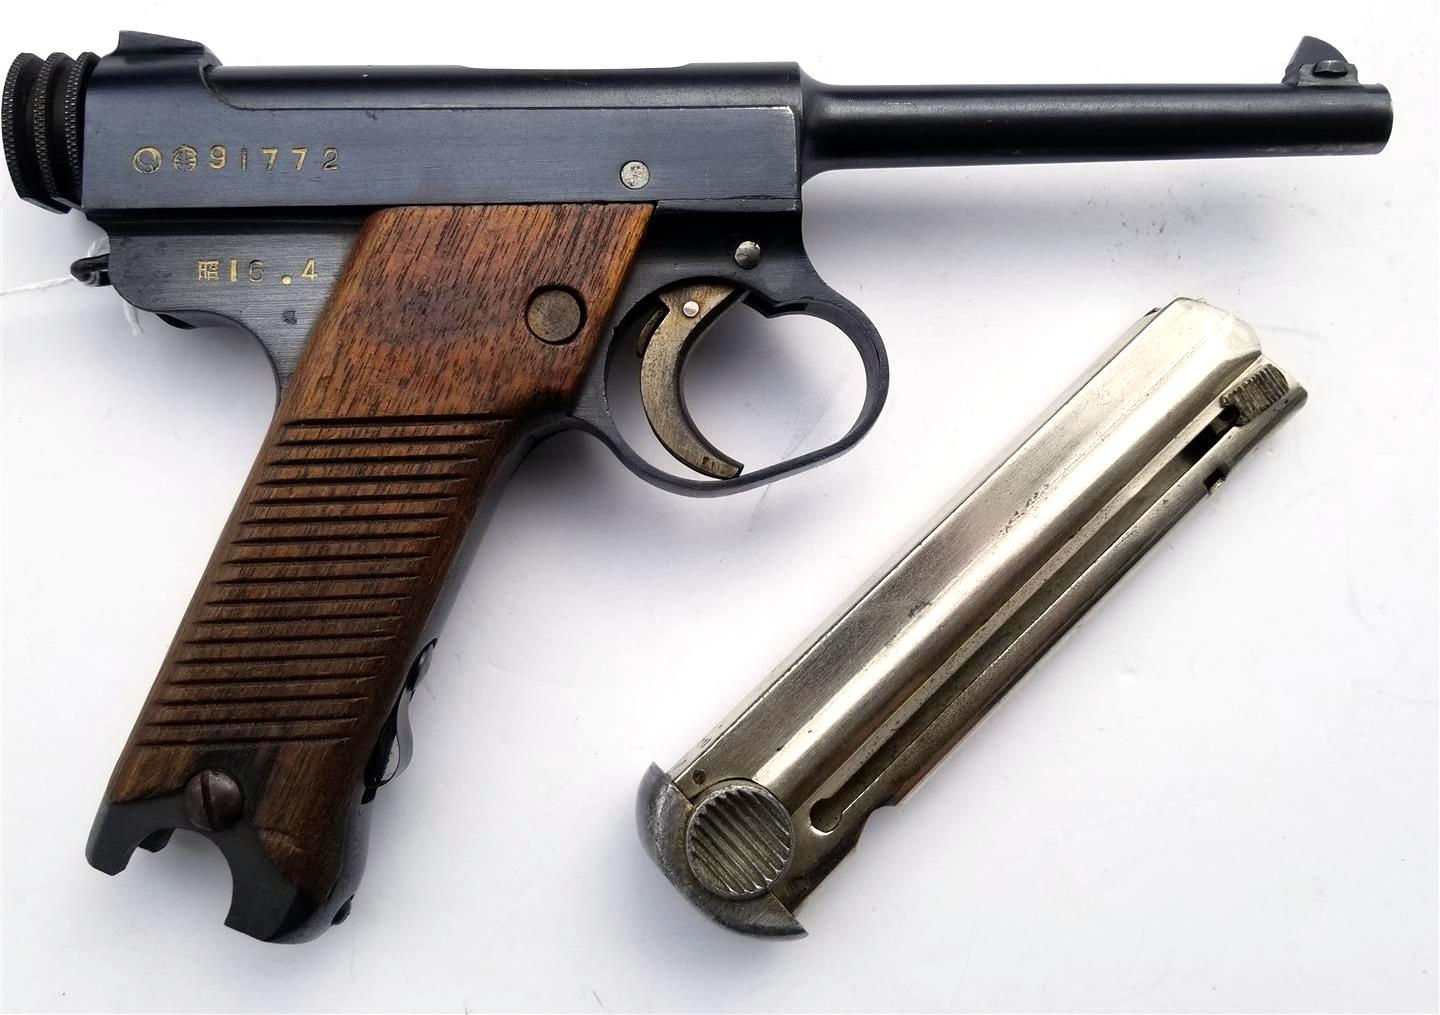 WWII Japanese Type 14 Nambu Pistol serial number 89742 and dated 18.9 (September 1943)...Pistol is all matching and in exceptional condition. All Federal, State and Local Firearms rules apply to local and interstate sales…C&R or FFL is required for this weapon…All Federal, State and Local Firearms rules apply to local and interstate sales… Available in my store By Appointment. Please note: There are NO SALES via PayPal for Firearms and Ammunition …PayPal is accepted for all other sales.